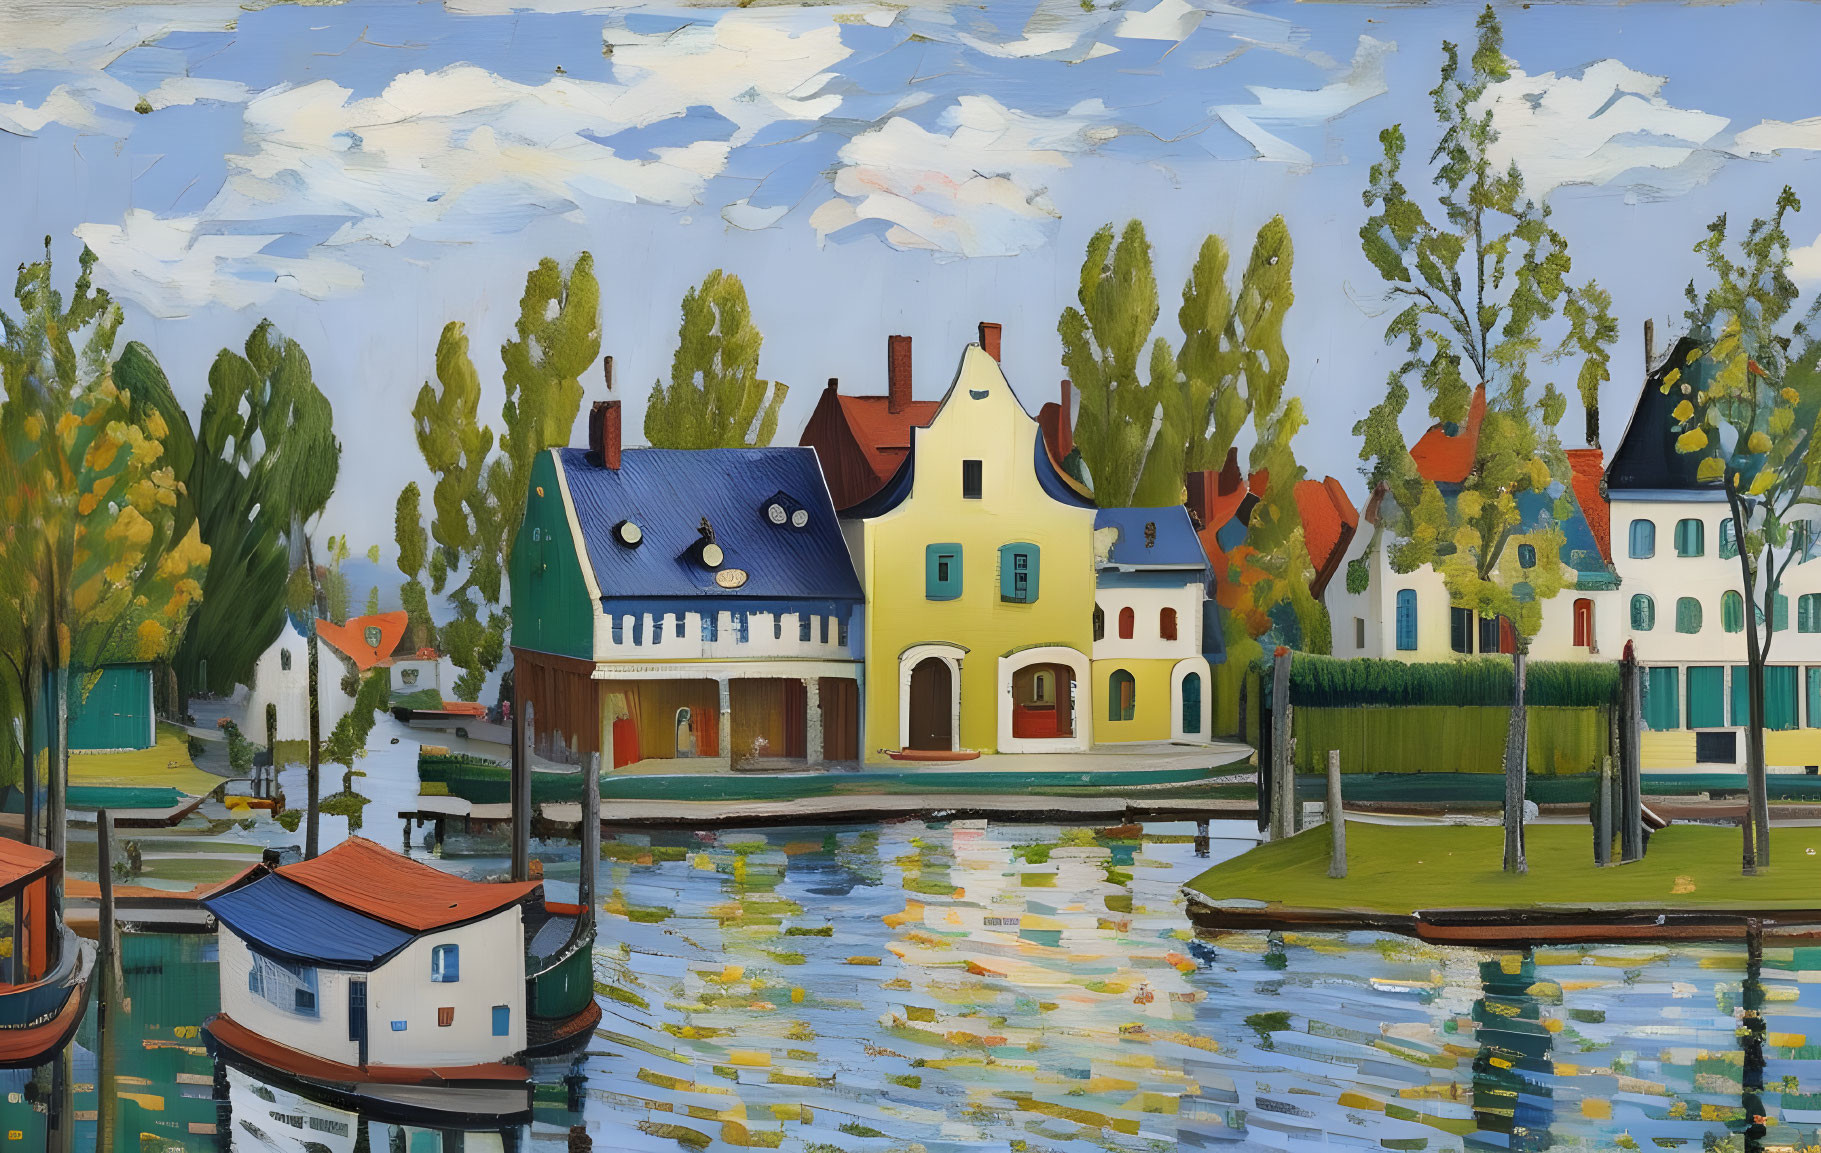 Houses by the Bank of the River Zaan